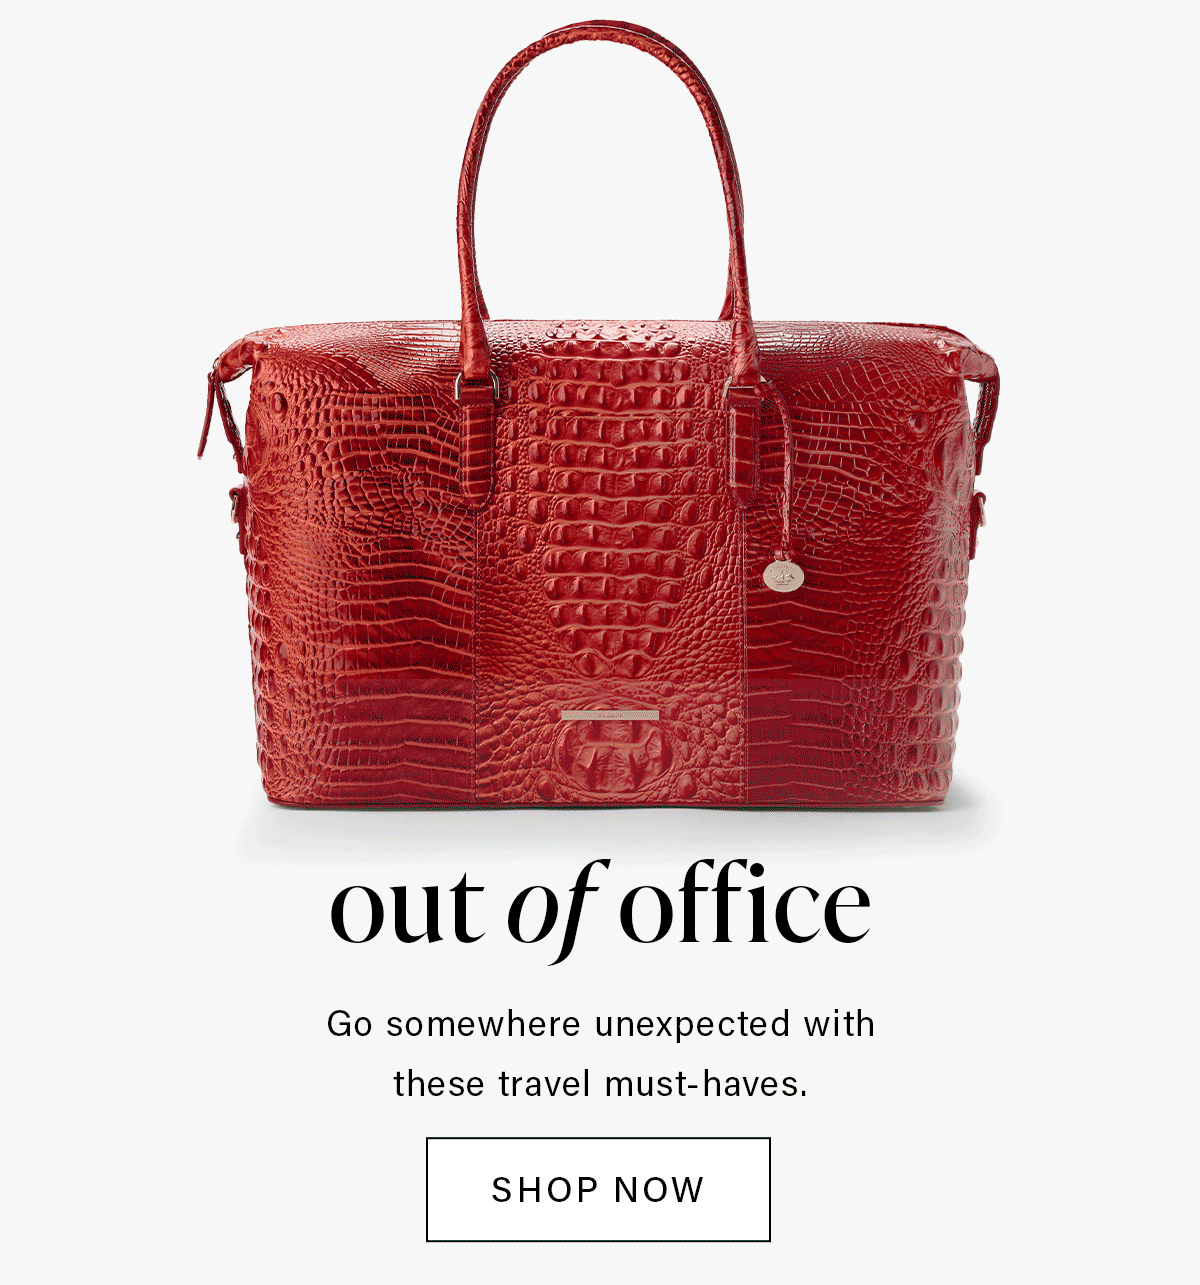 out of office Go somewhere unexpected with these travel must-haves. SHOP NOW